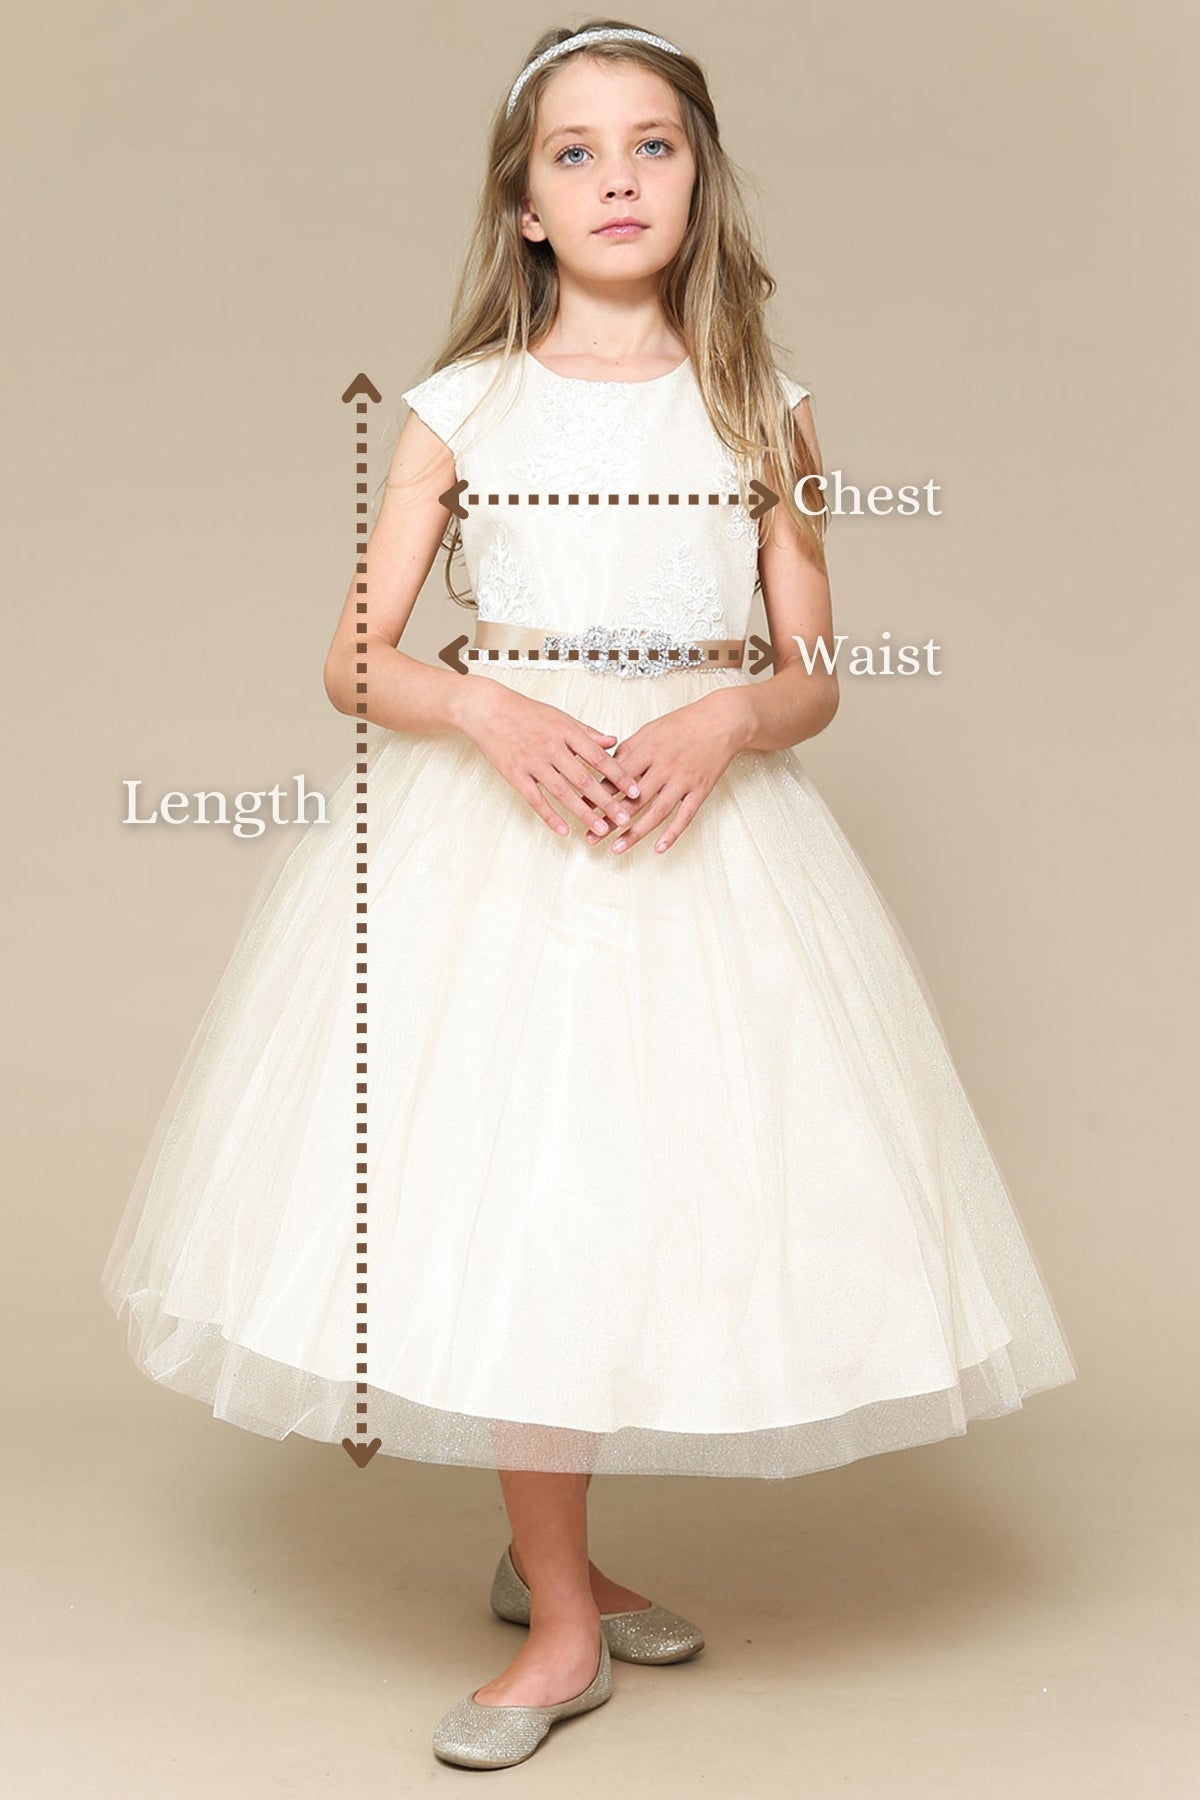 Dress - Ella Lace Girls Dress With Pearl Belt And Plus Size